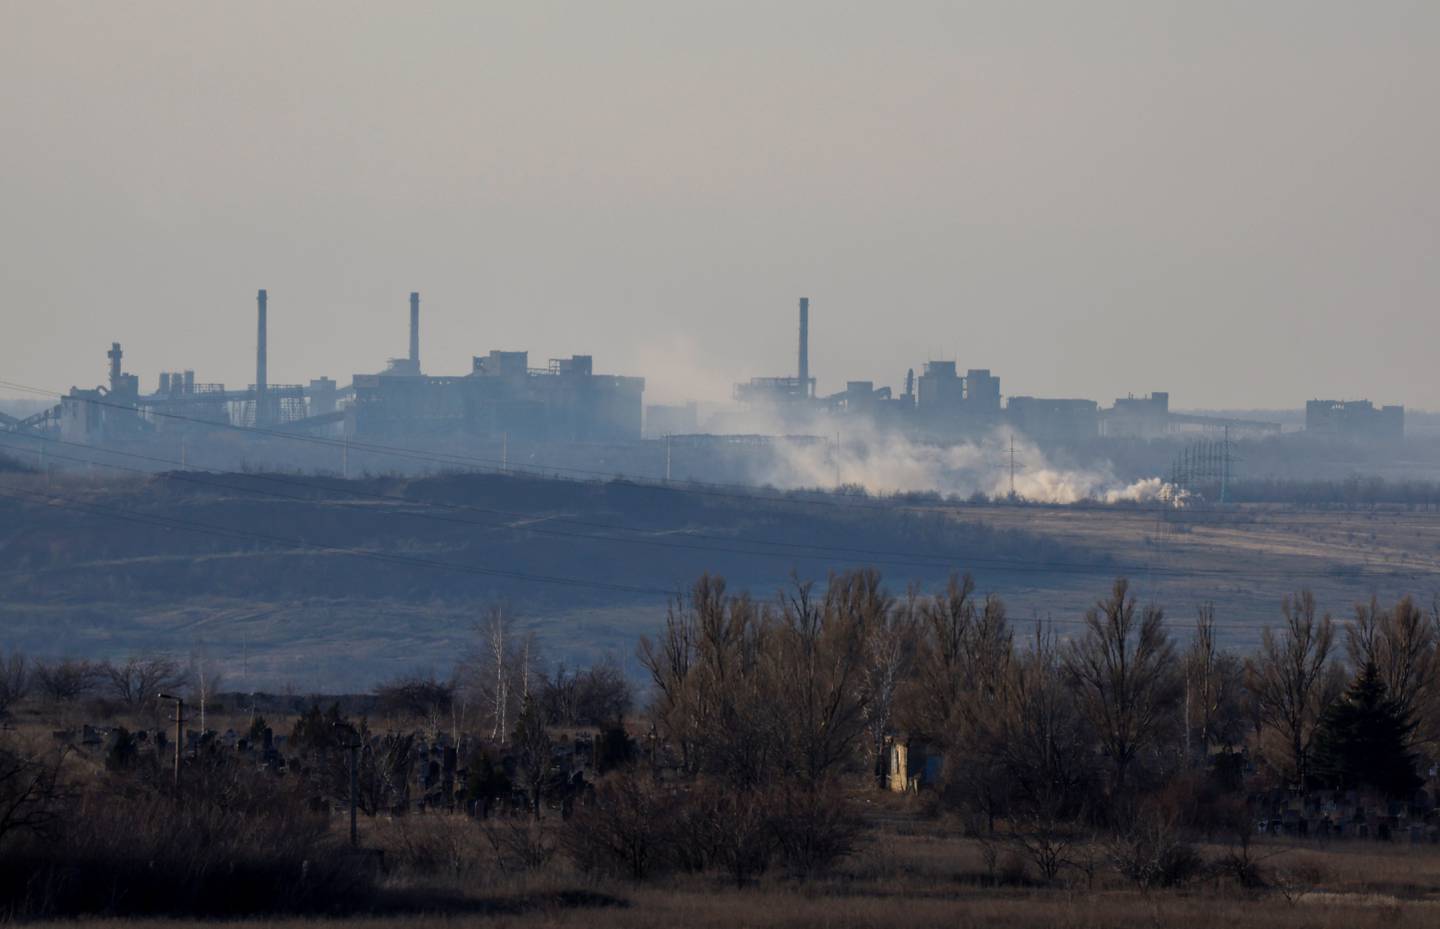 Smoke rises near the Avdiivka Coke and Chemical Plant in the town of Avdiivka in the course of Russia-Ukraine conflict, as seen from Yasynuvata (Yasinovataya) in the Donetsk region, Russian-controlled Ukraine, February 15, 2024. REUTERS/Alexander Ermochenko